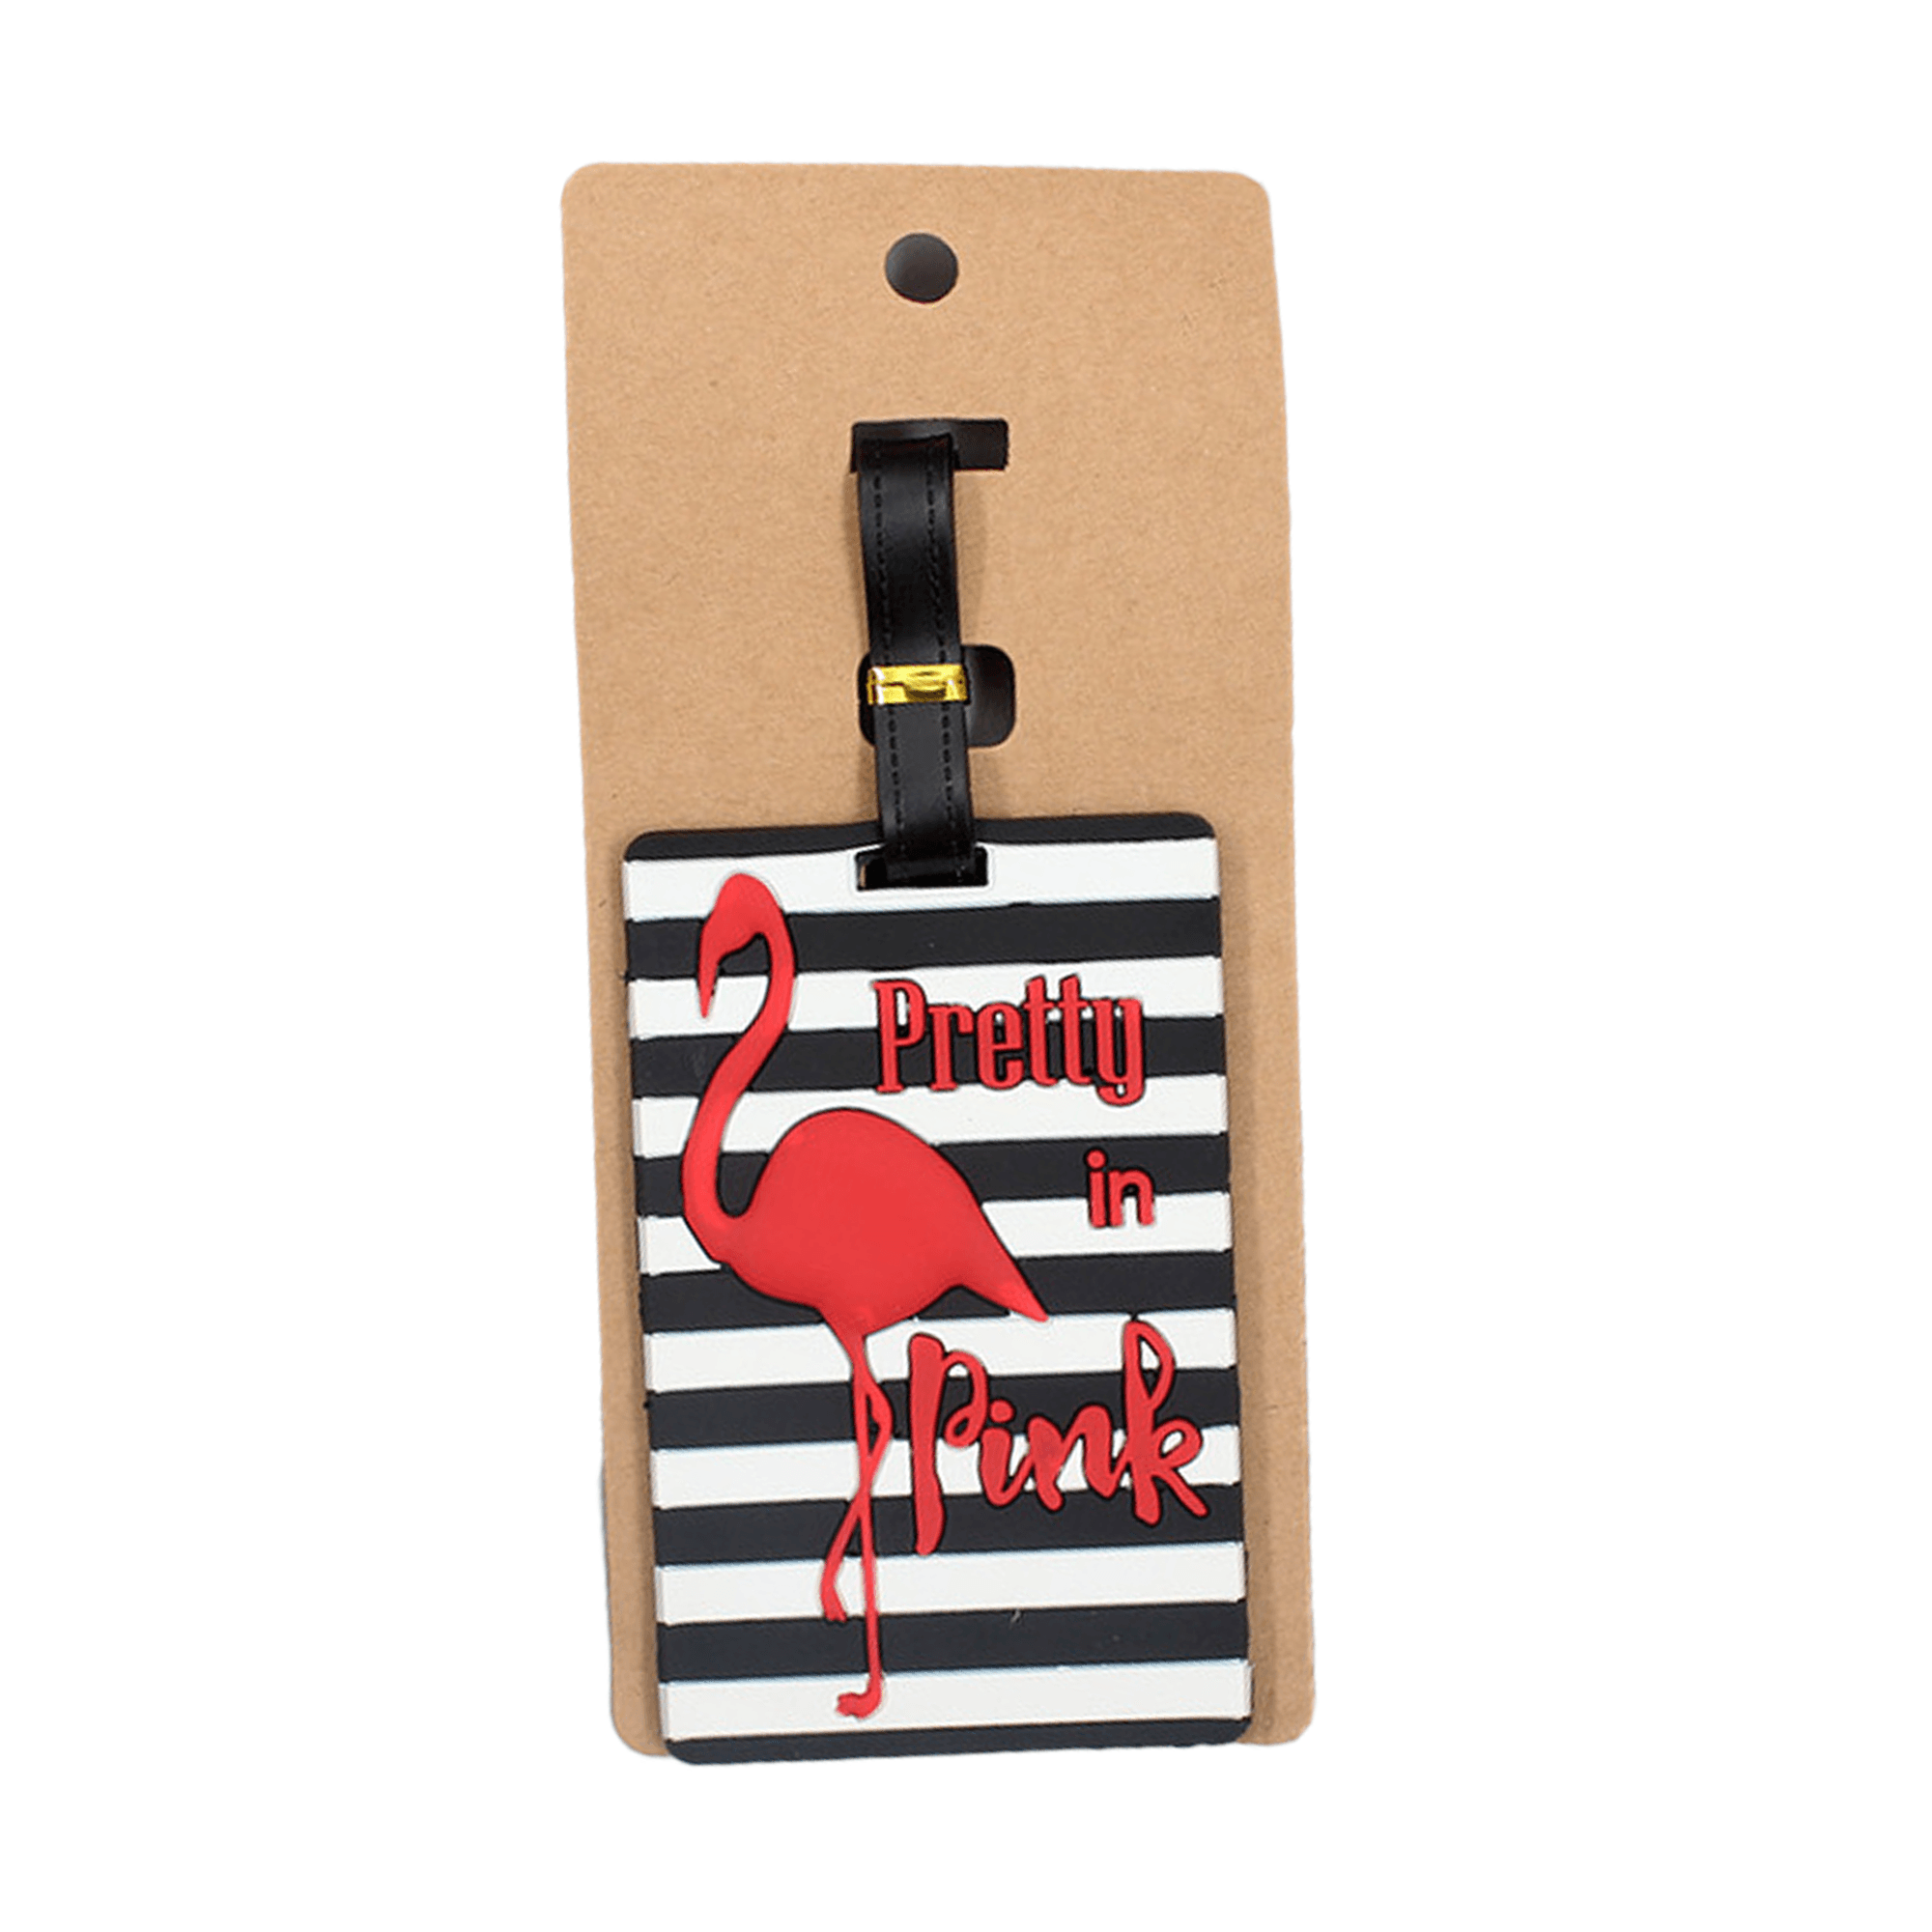 Luggage Travel Tag - San Michelle Bags suitcase nz